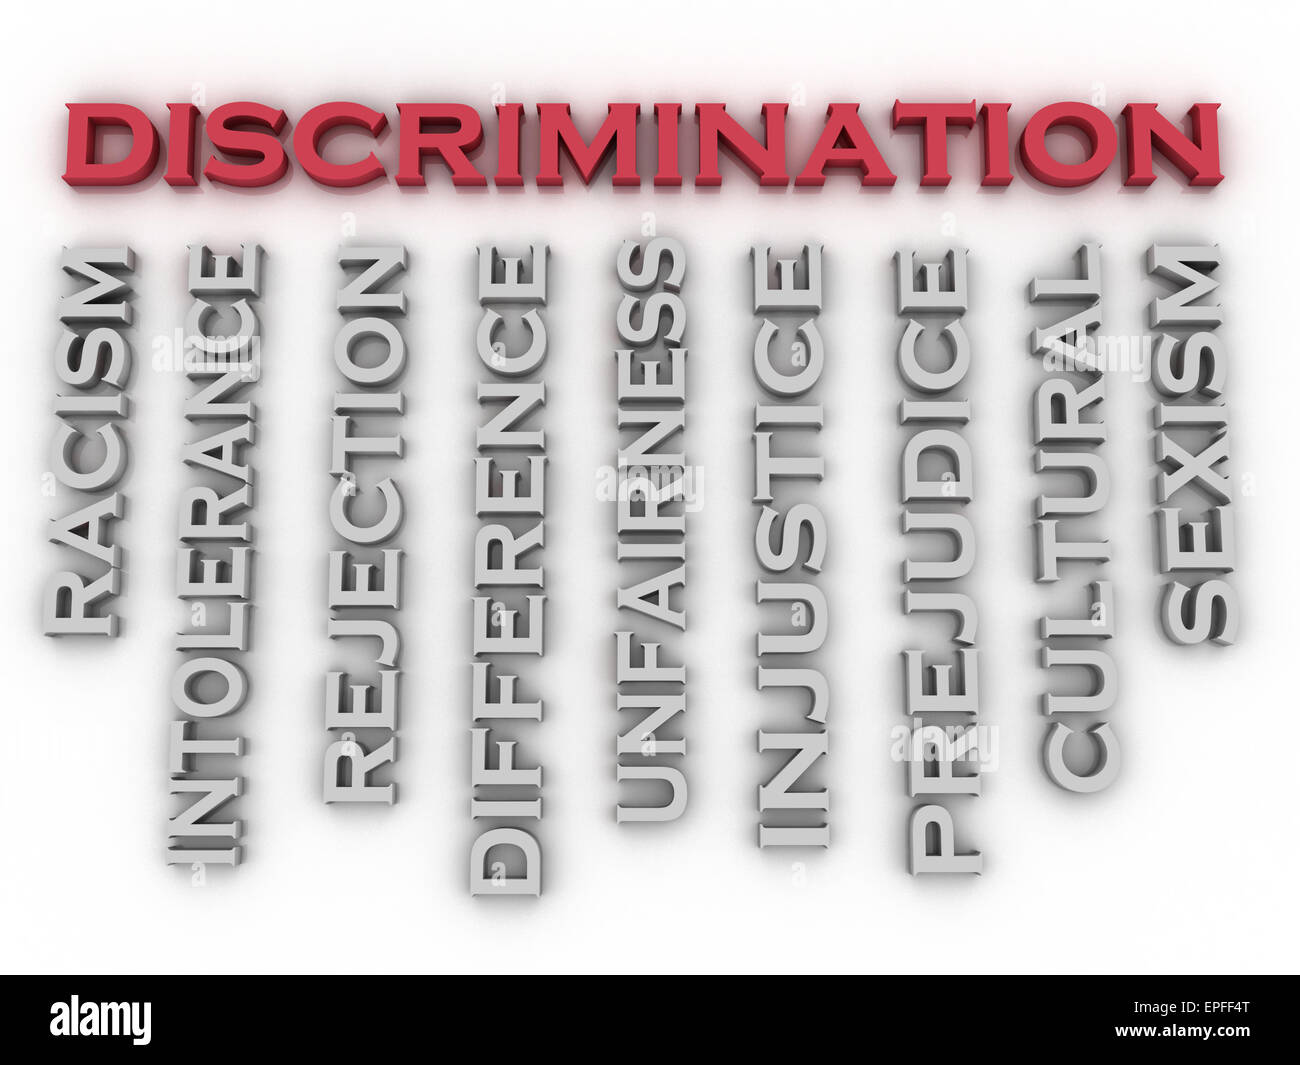 3d image Discrimination  issues concept word cloud background Stock Photo